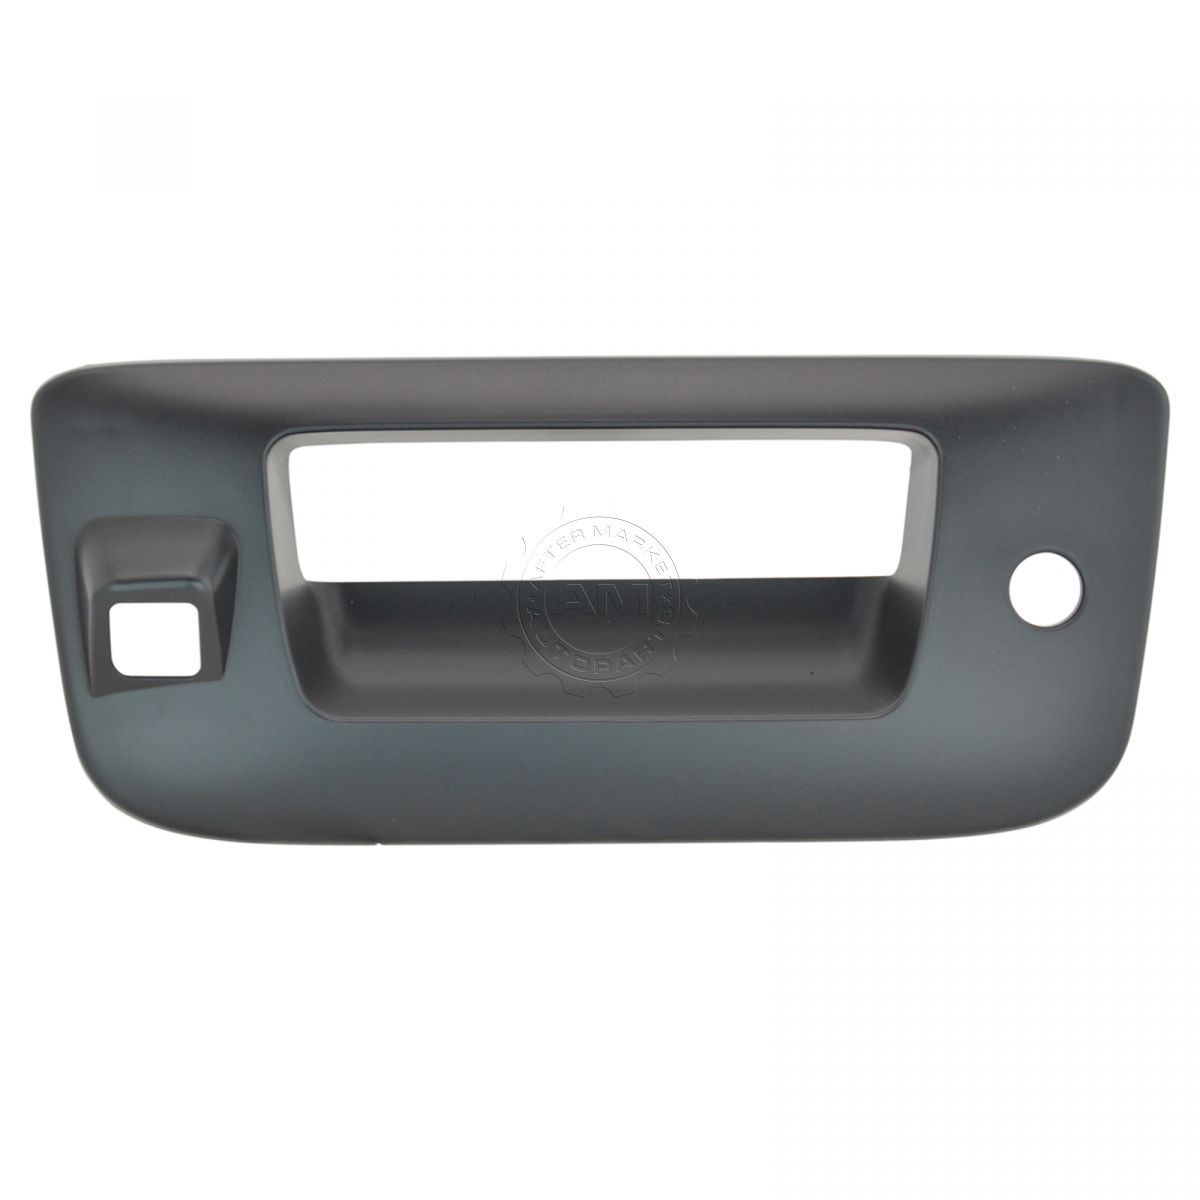 Tailgate Handle Bezel With Key And Camera Hole Smooth Black For Silverado